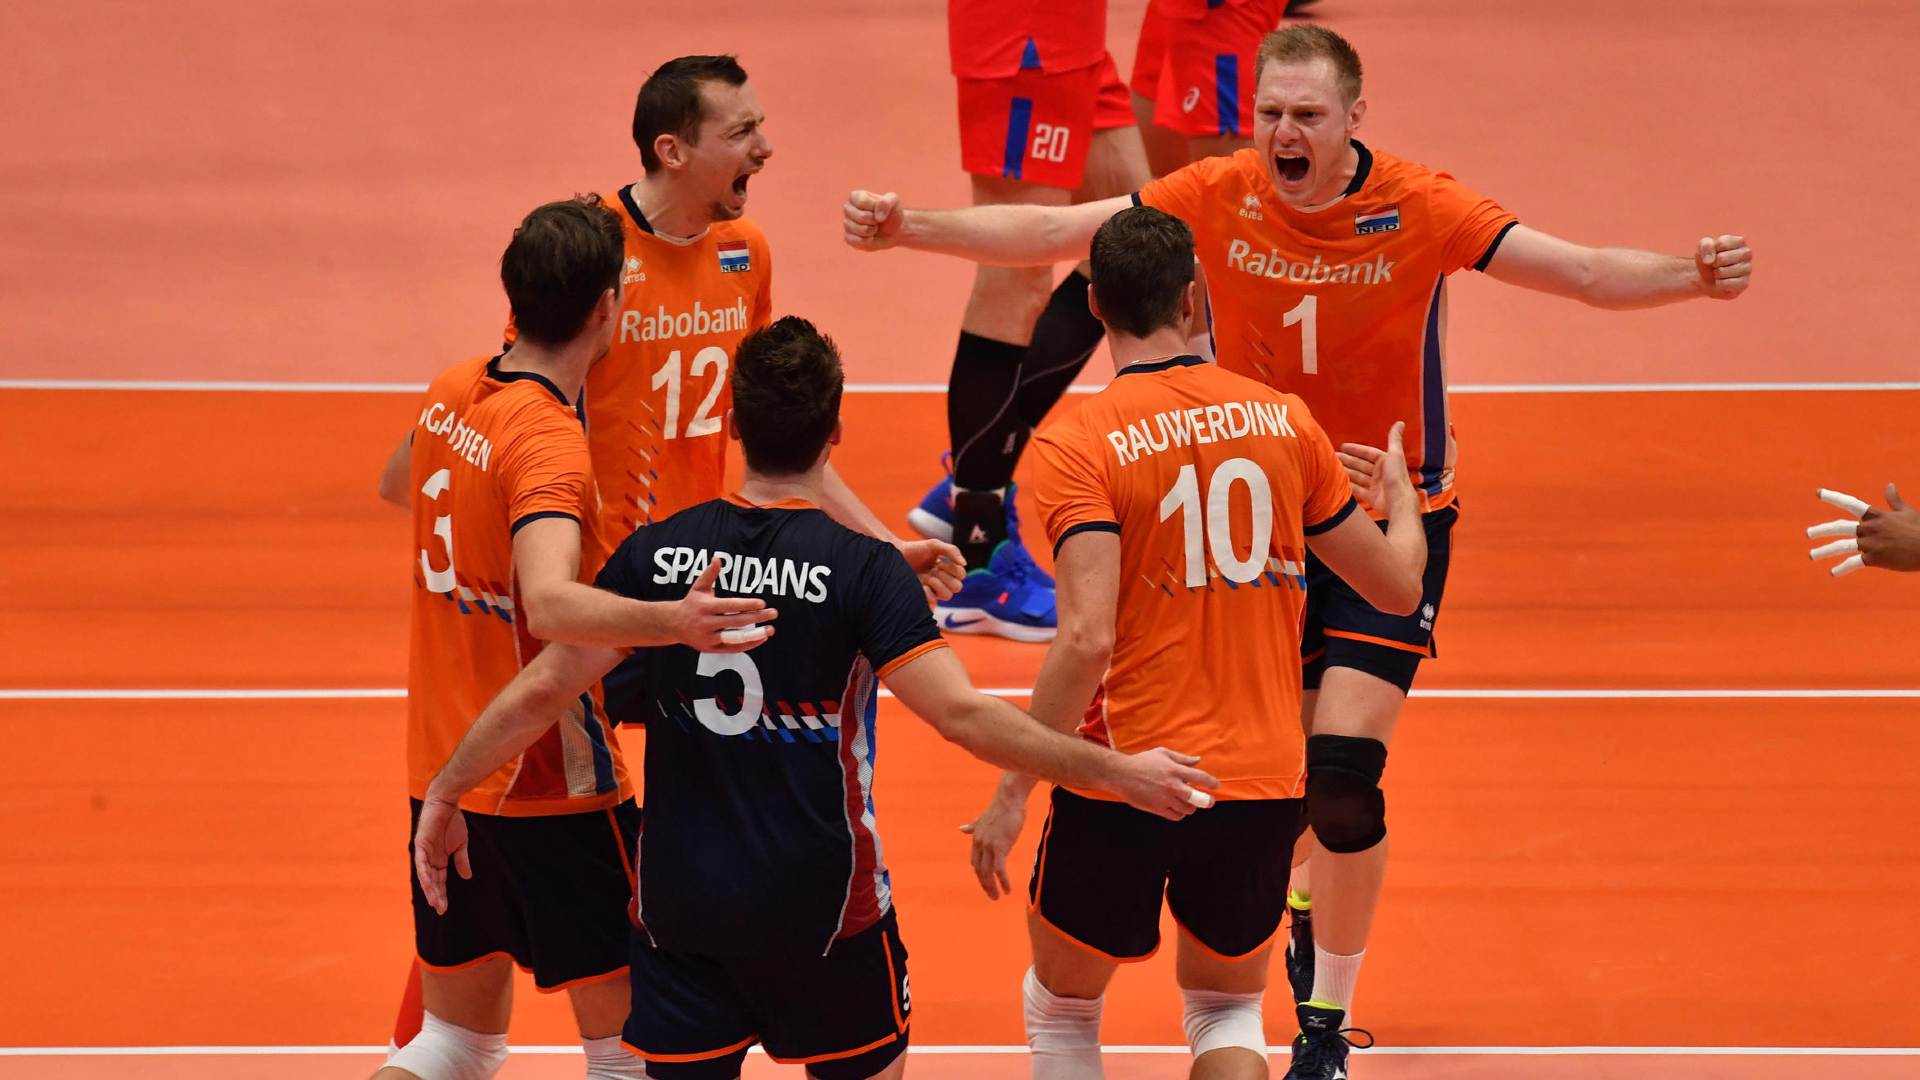 Official FIVB Volleyball Signed By The Netherlands National